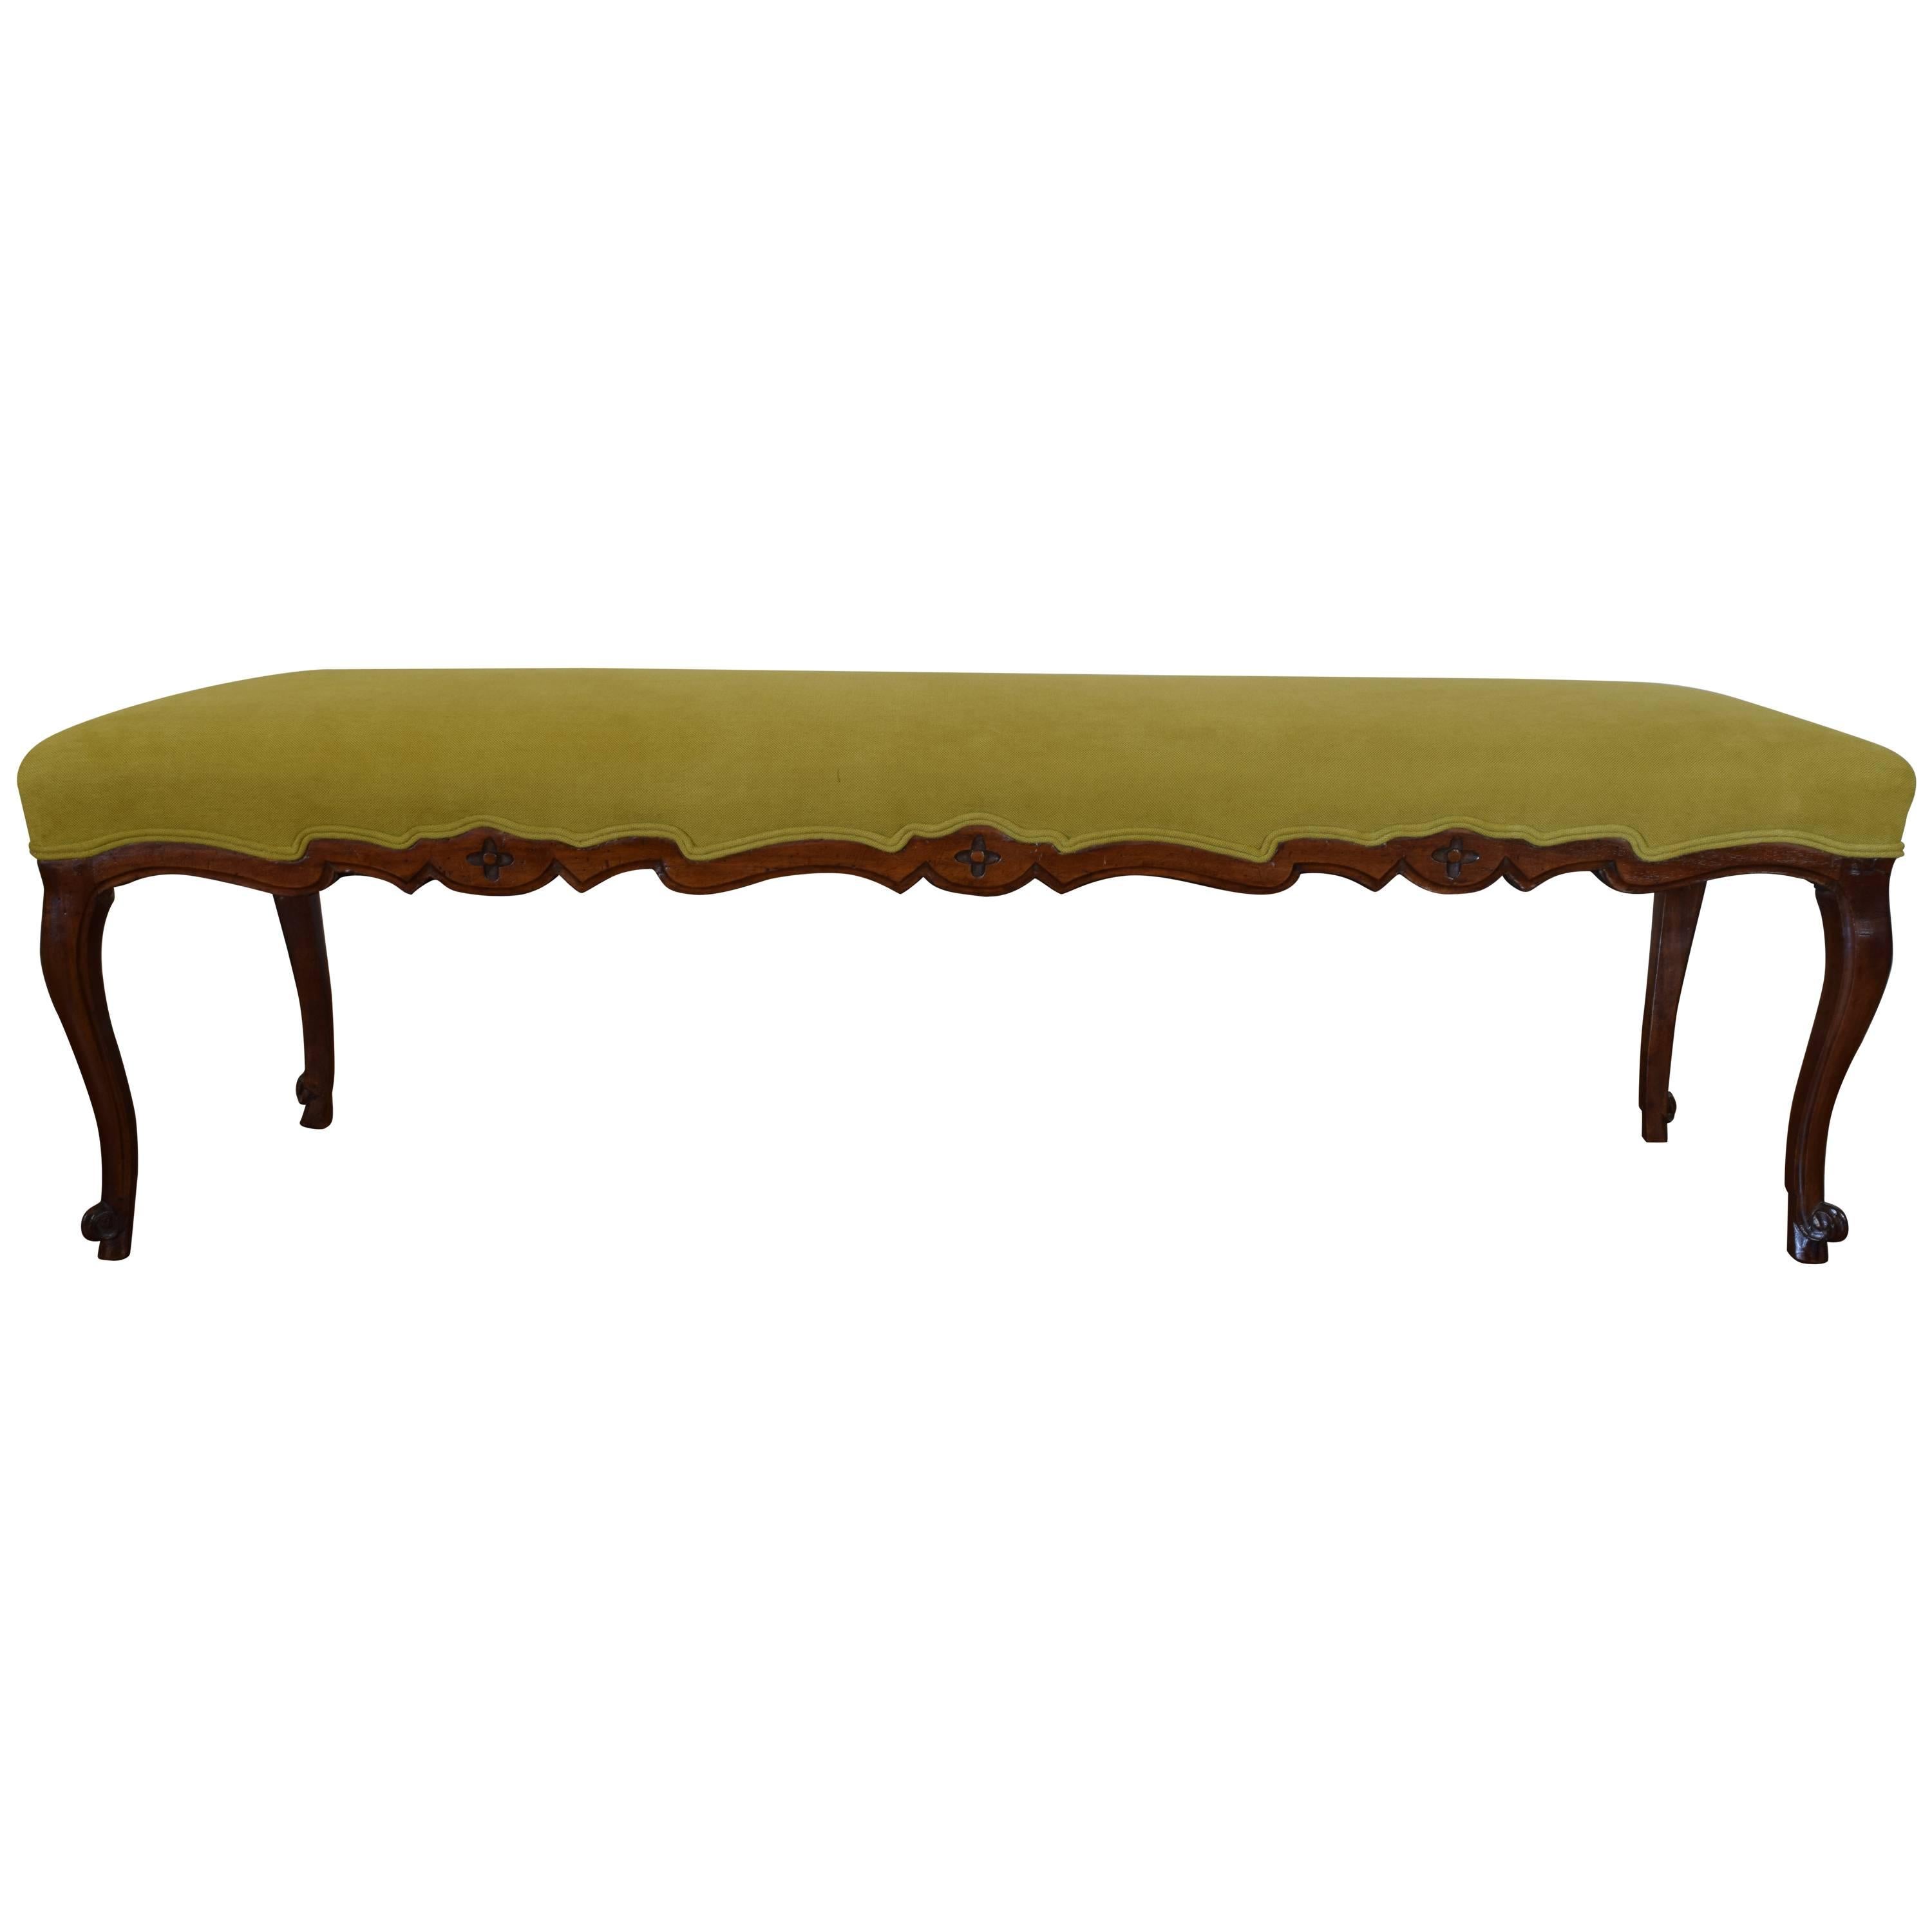 Italian LXV Style Carved Walnut and Upholstered Bench, 19th Century